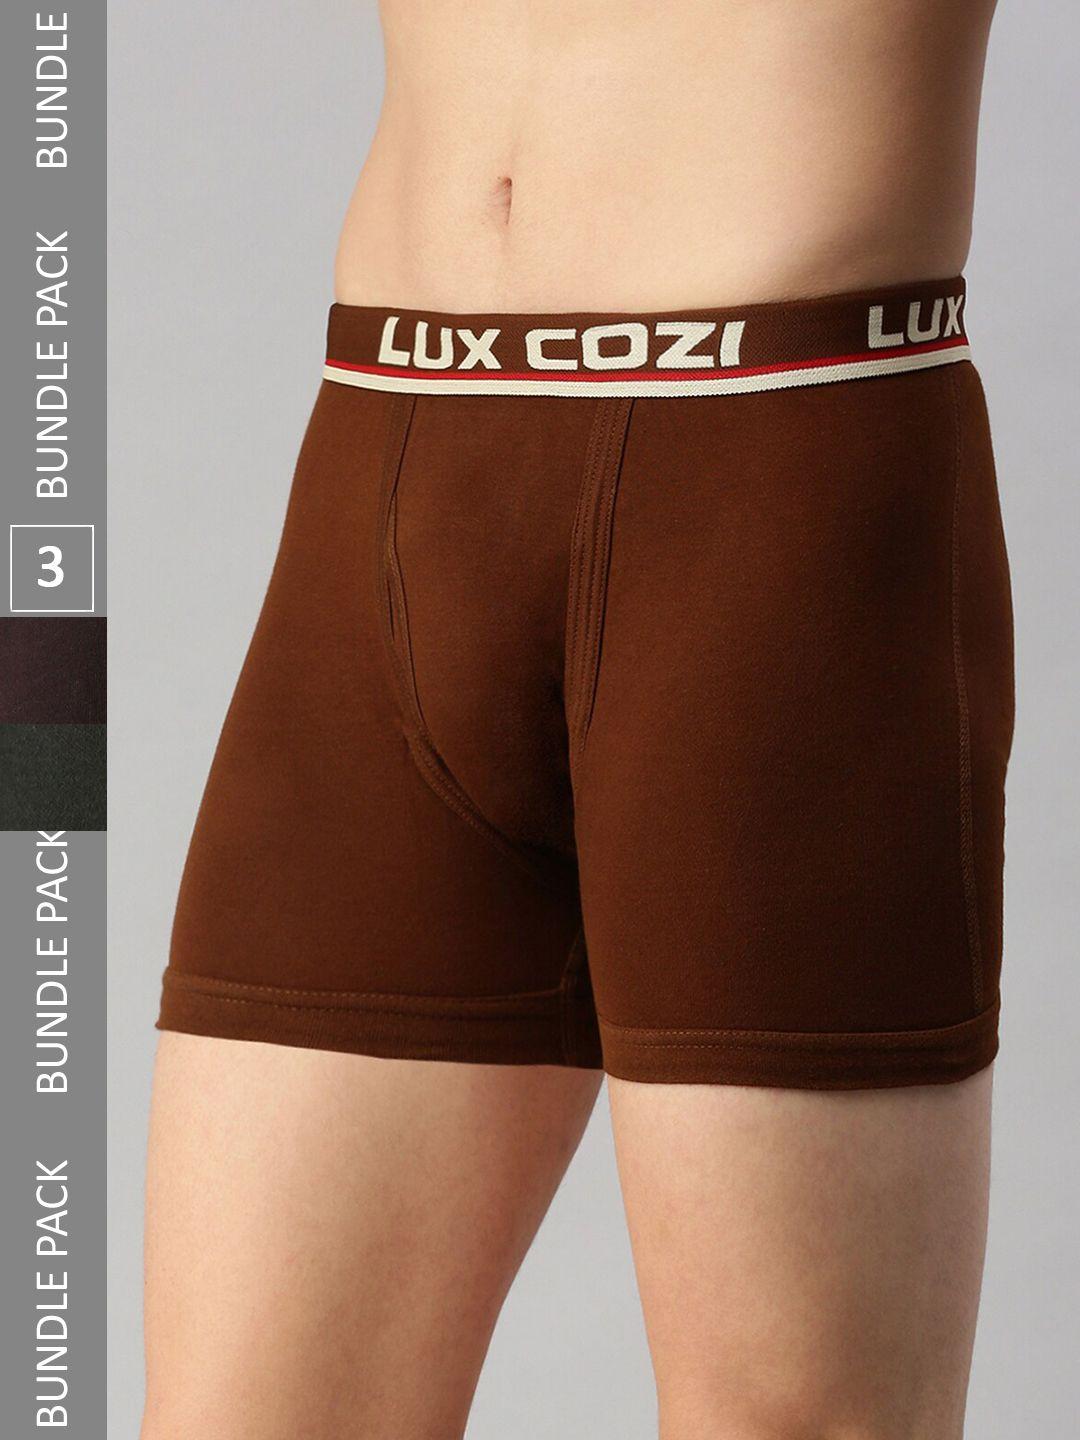 lux cozi pack of 3 mid-rise outer elastic long trunks